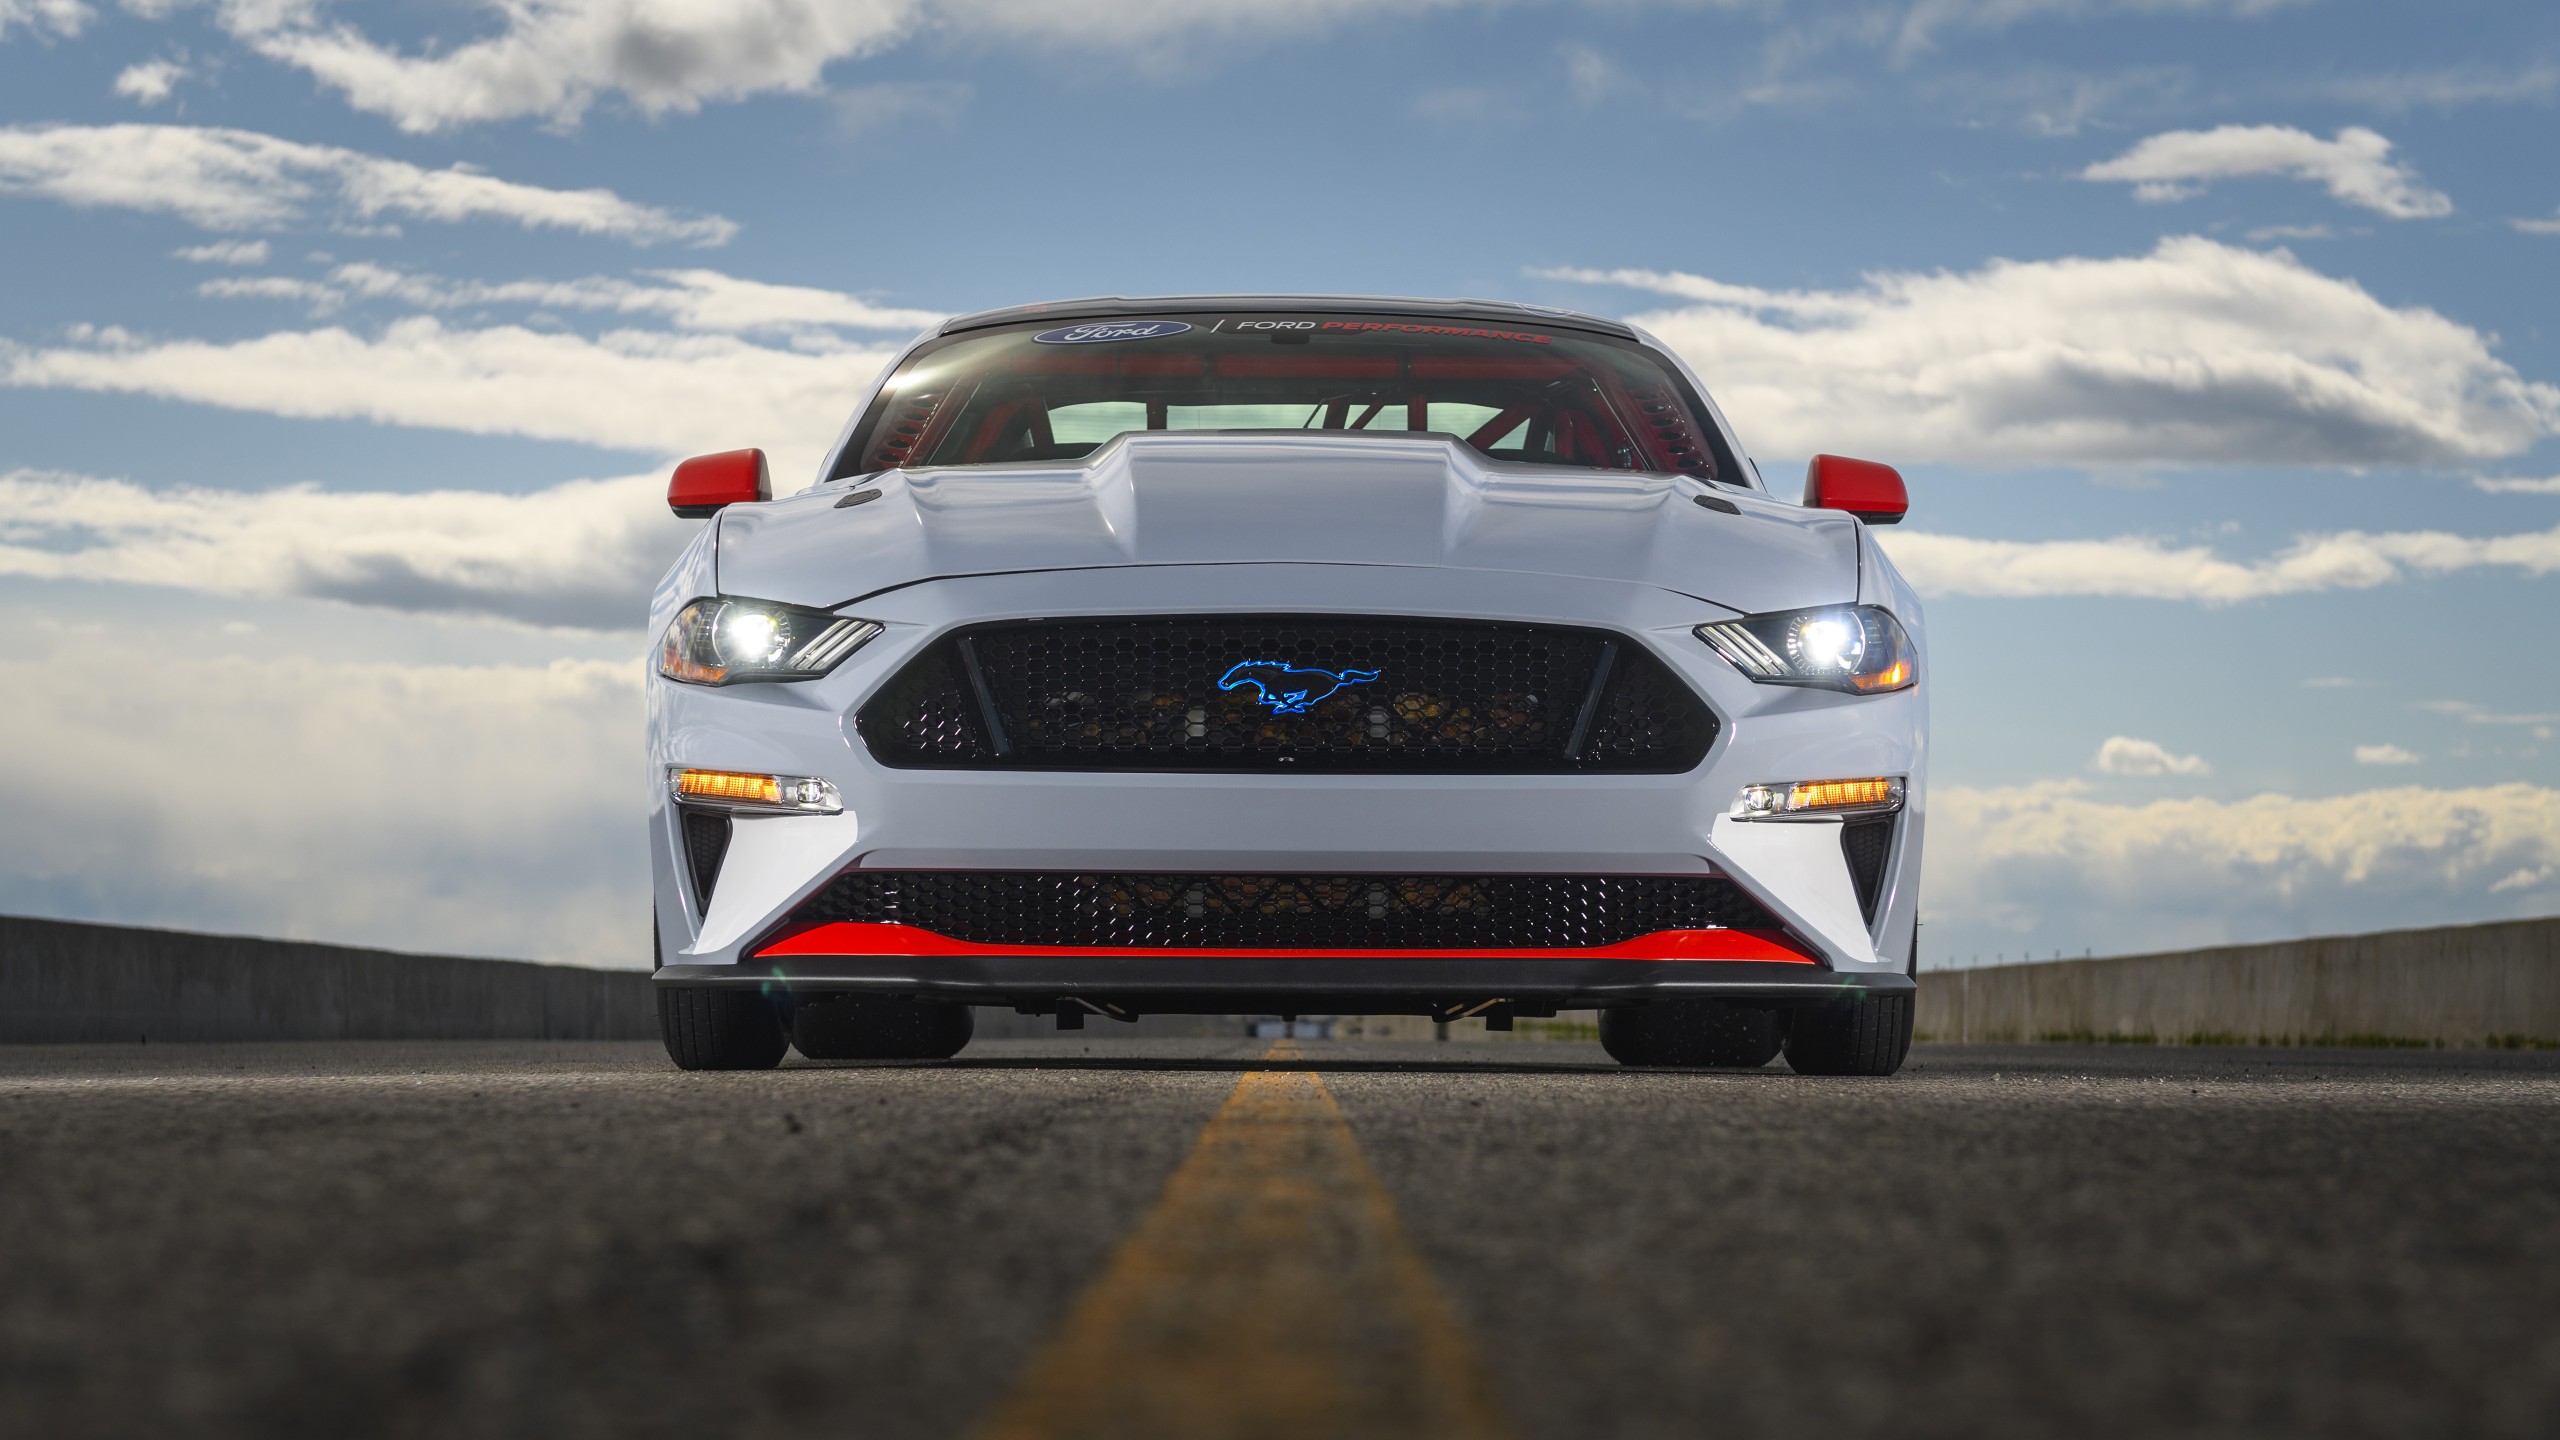 2020 Ford Mustang Cobra Jet 1400 Concept